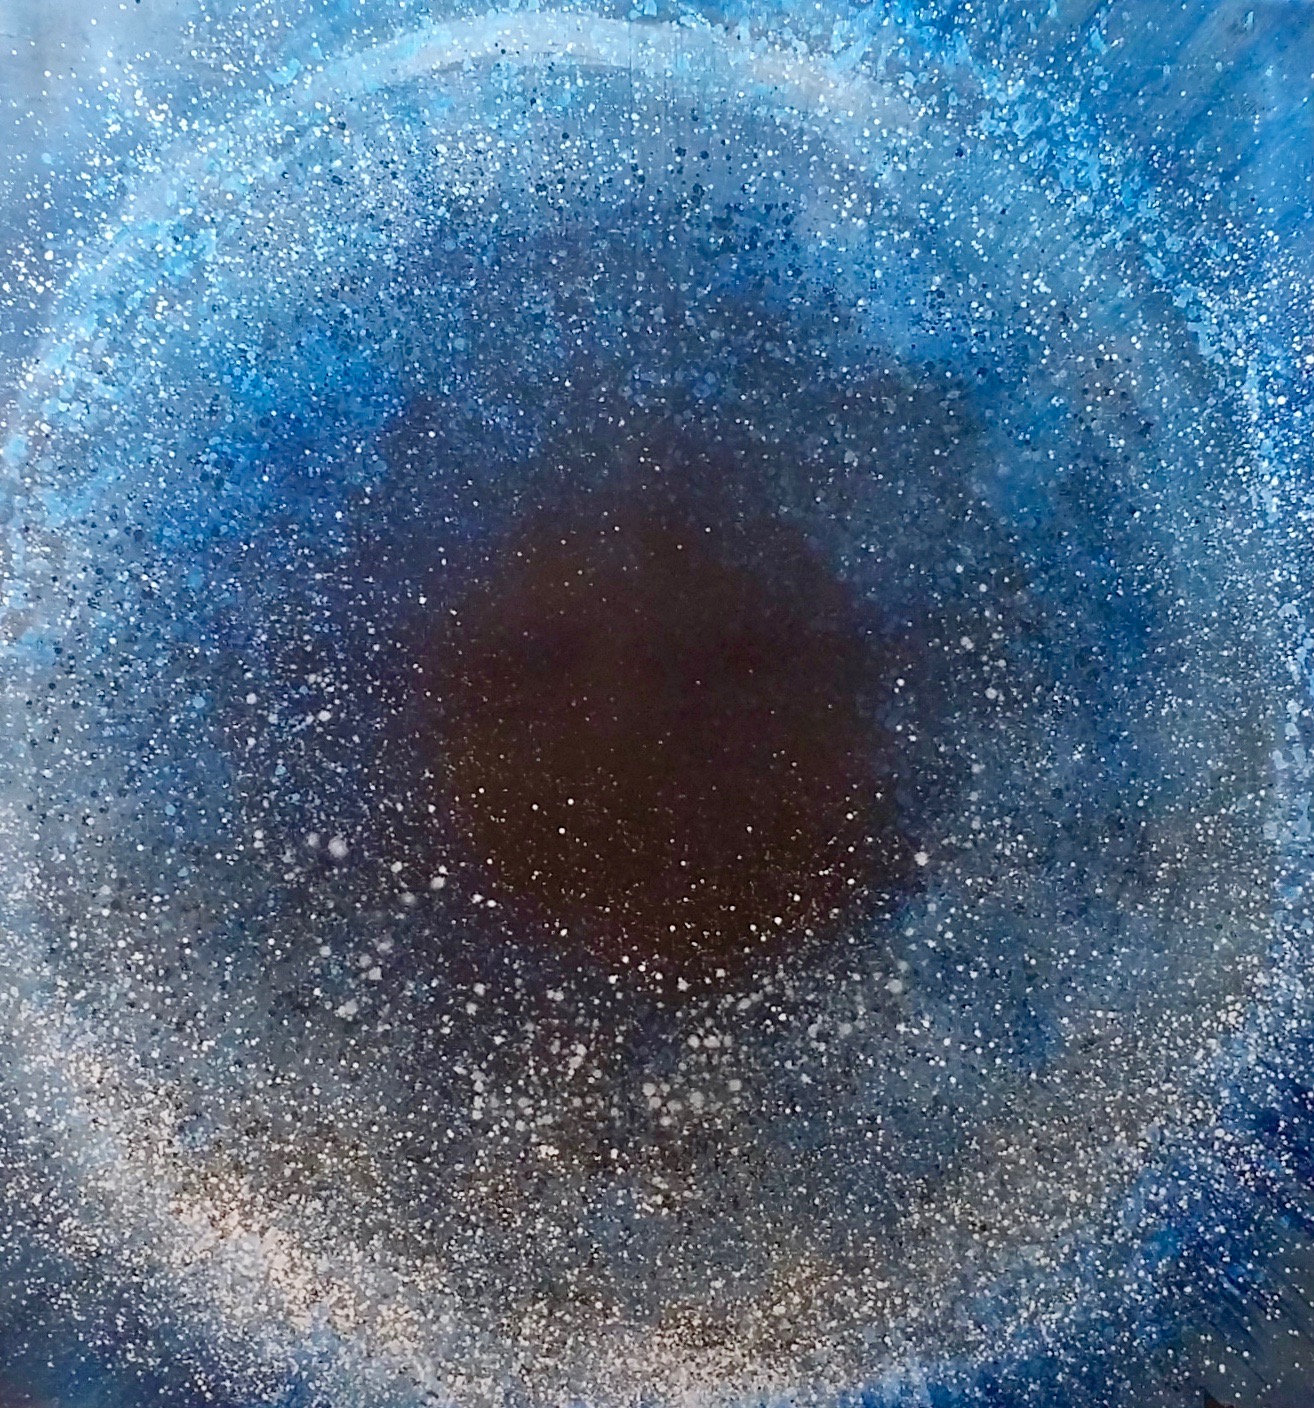  Cosmic View, 2018 61 x 61 inches Acrylic on 2/8” close-cell black foam   